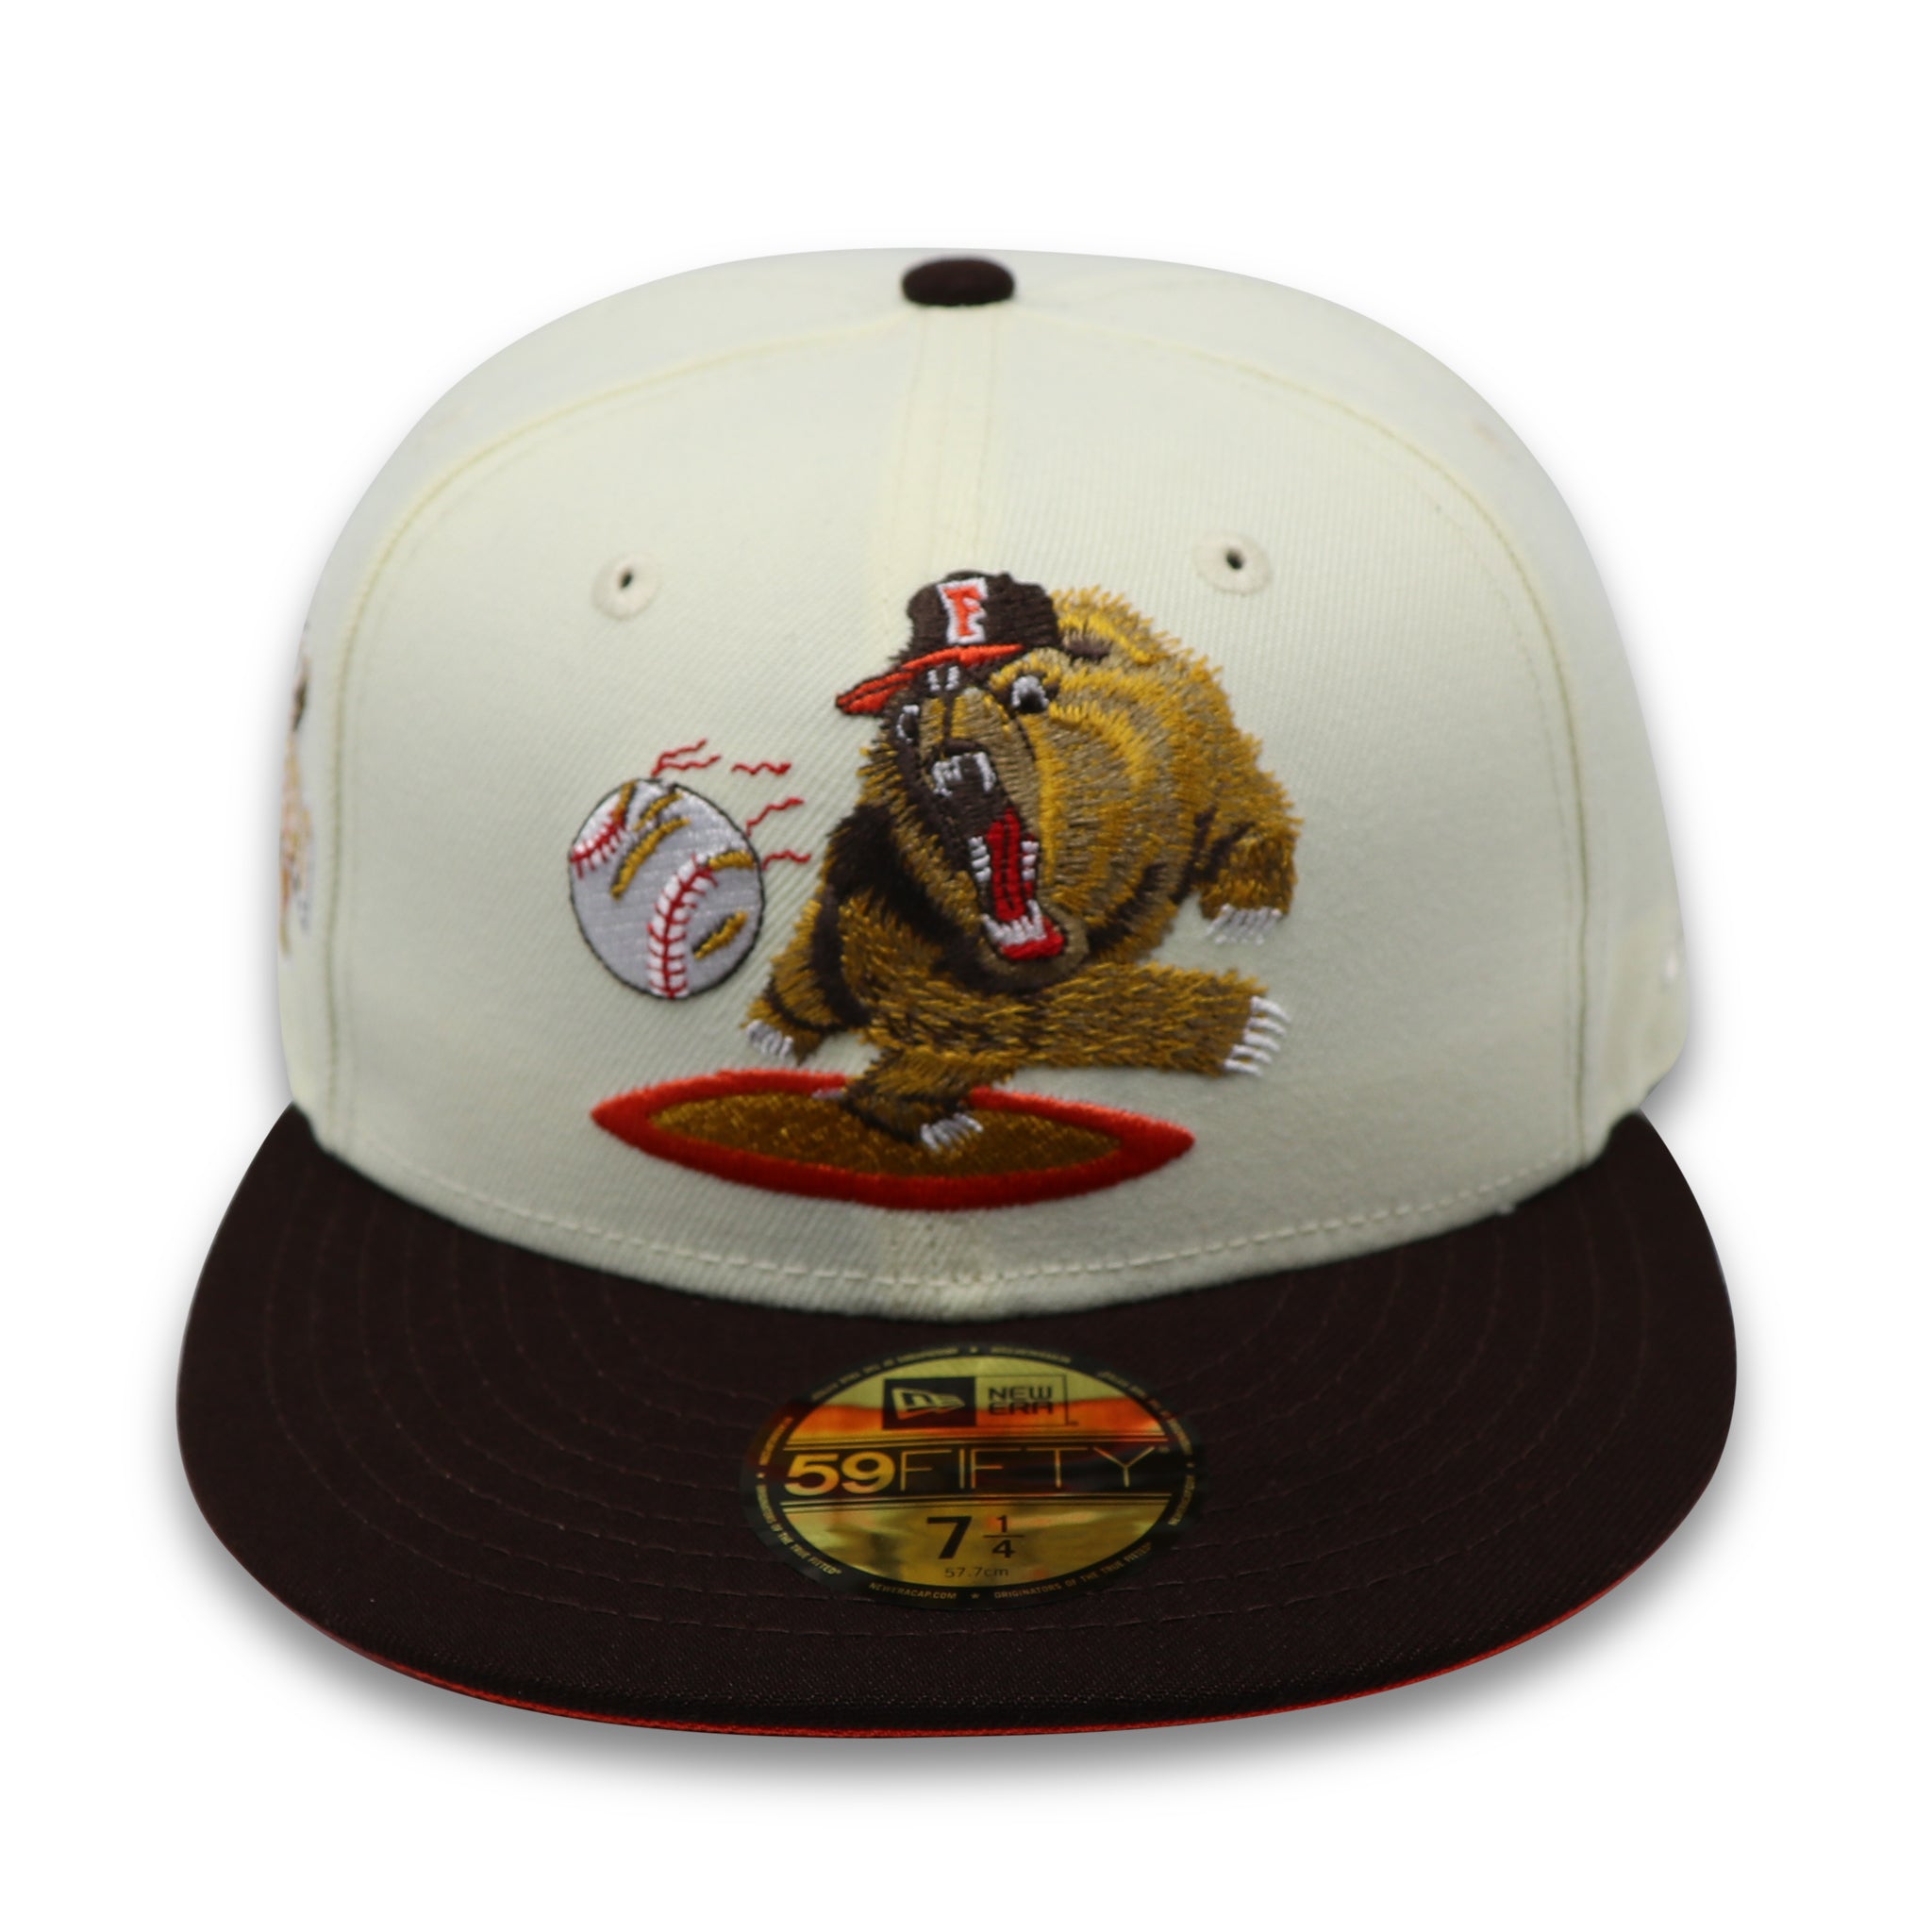 FRESNO GRIZZLIES (OFF-WHITE) "CALI LEAGUE" NEW ERA 59FIFTY FITTED (ORANGE UNDER VISOR)